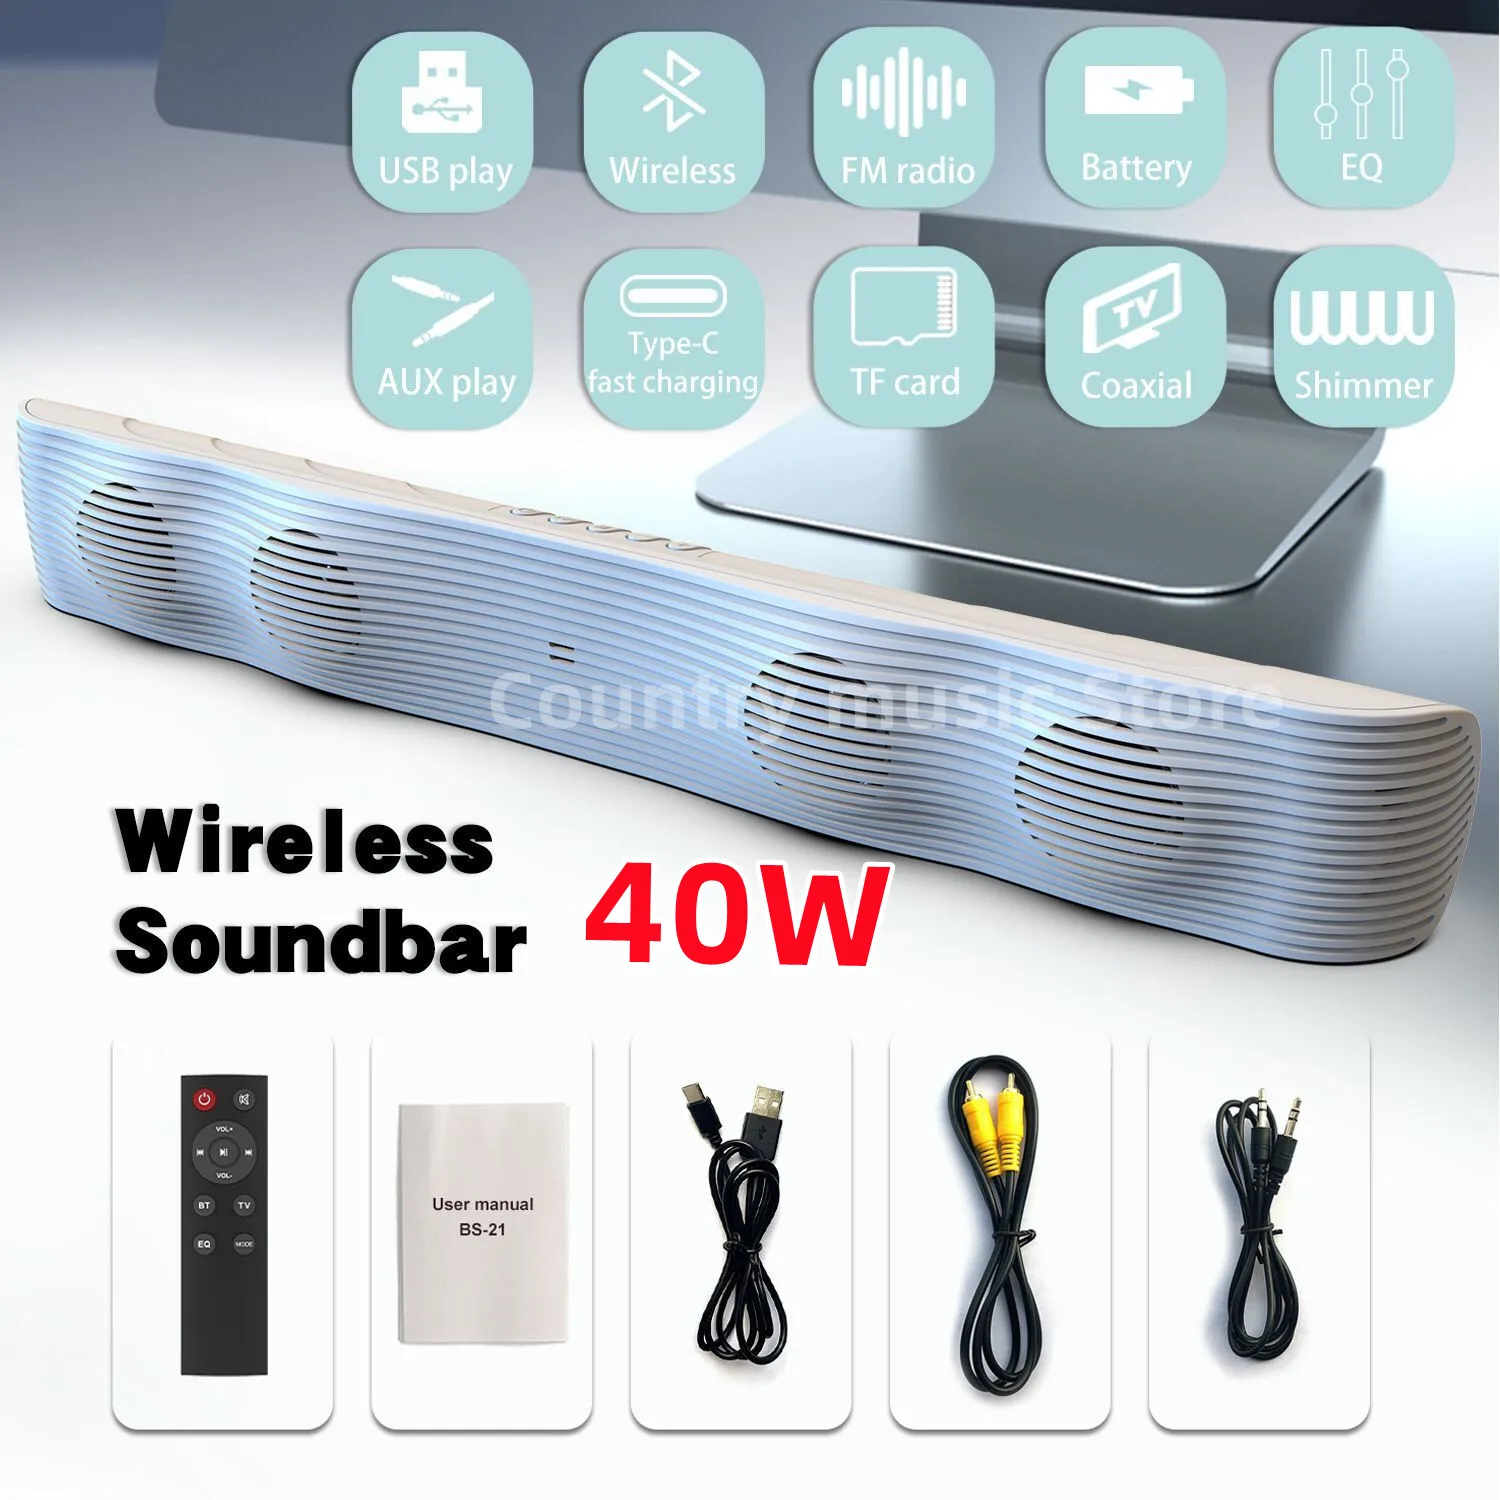 Home theater HIFI Portable Wireless Bluetooth Speakers column Stereo Bass Sound bar FM Radio USB Subwoofer for Computer TV Phone